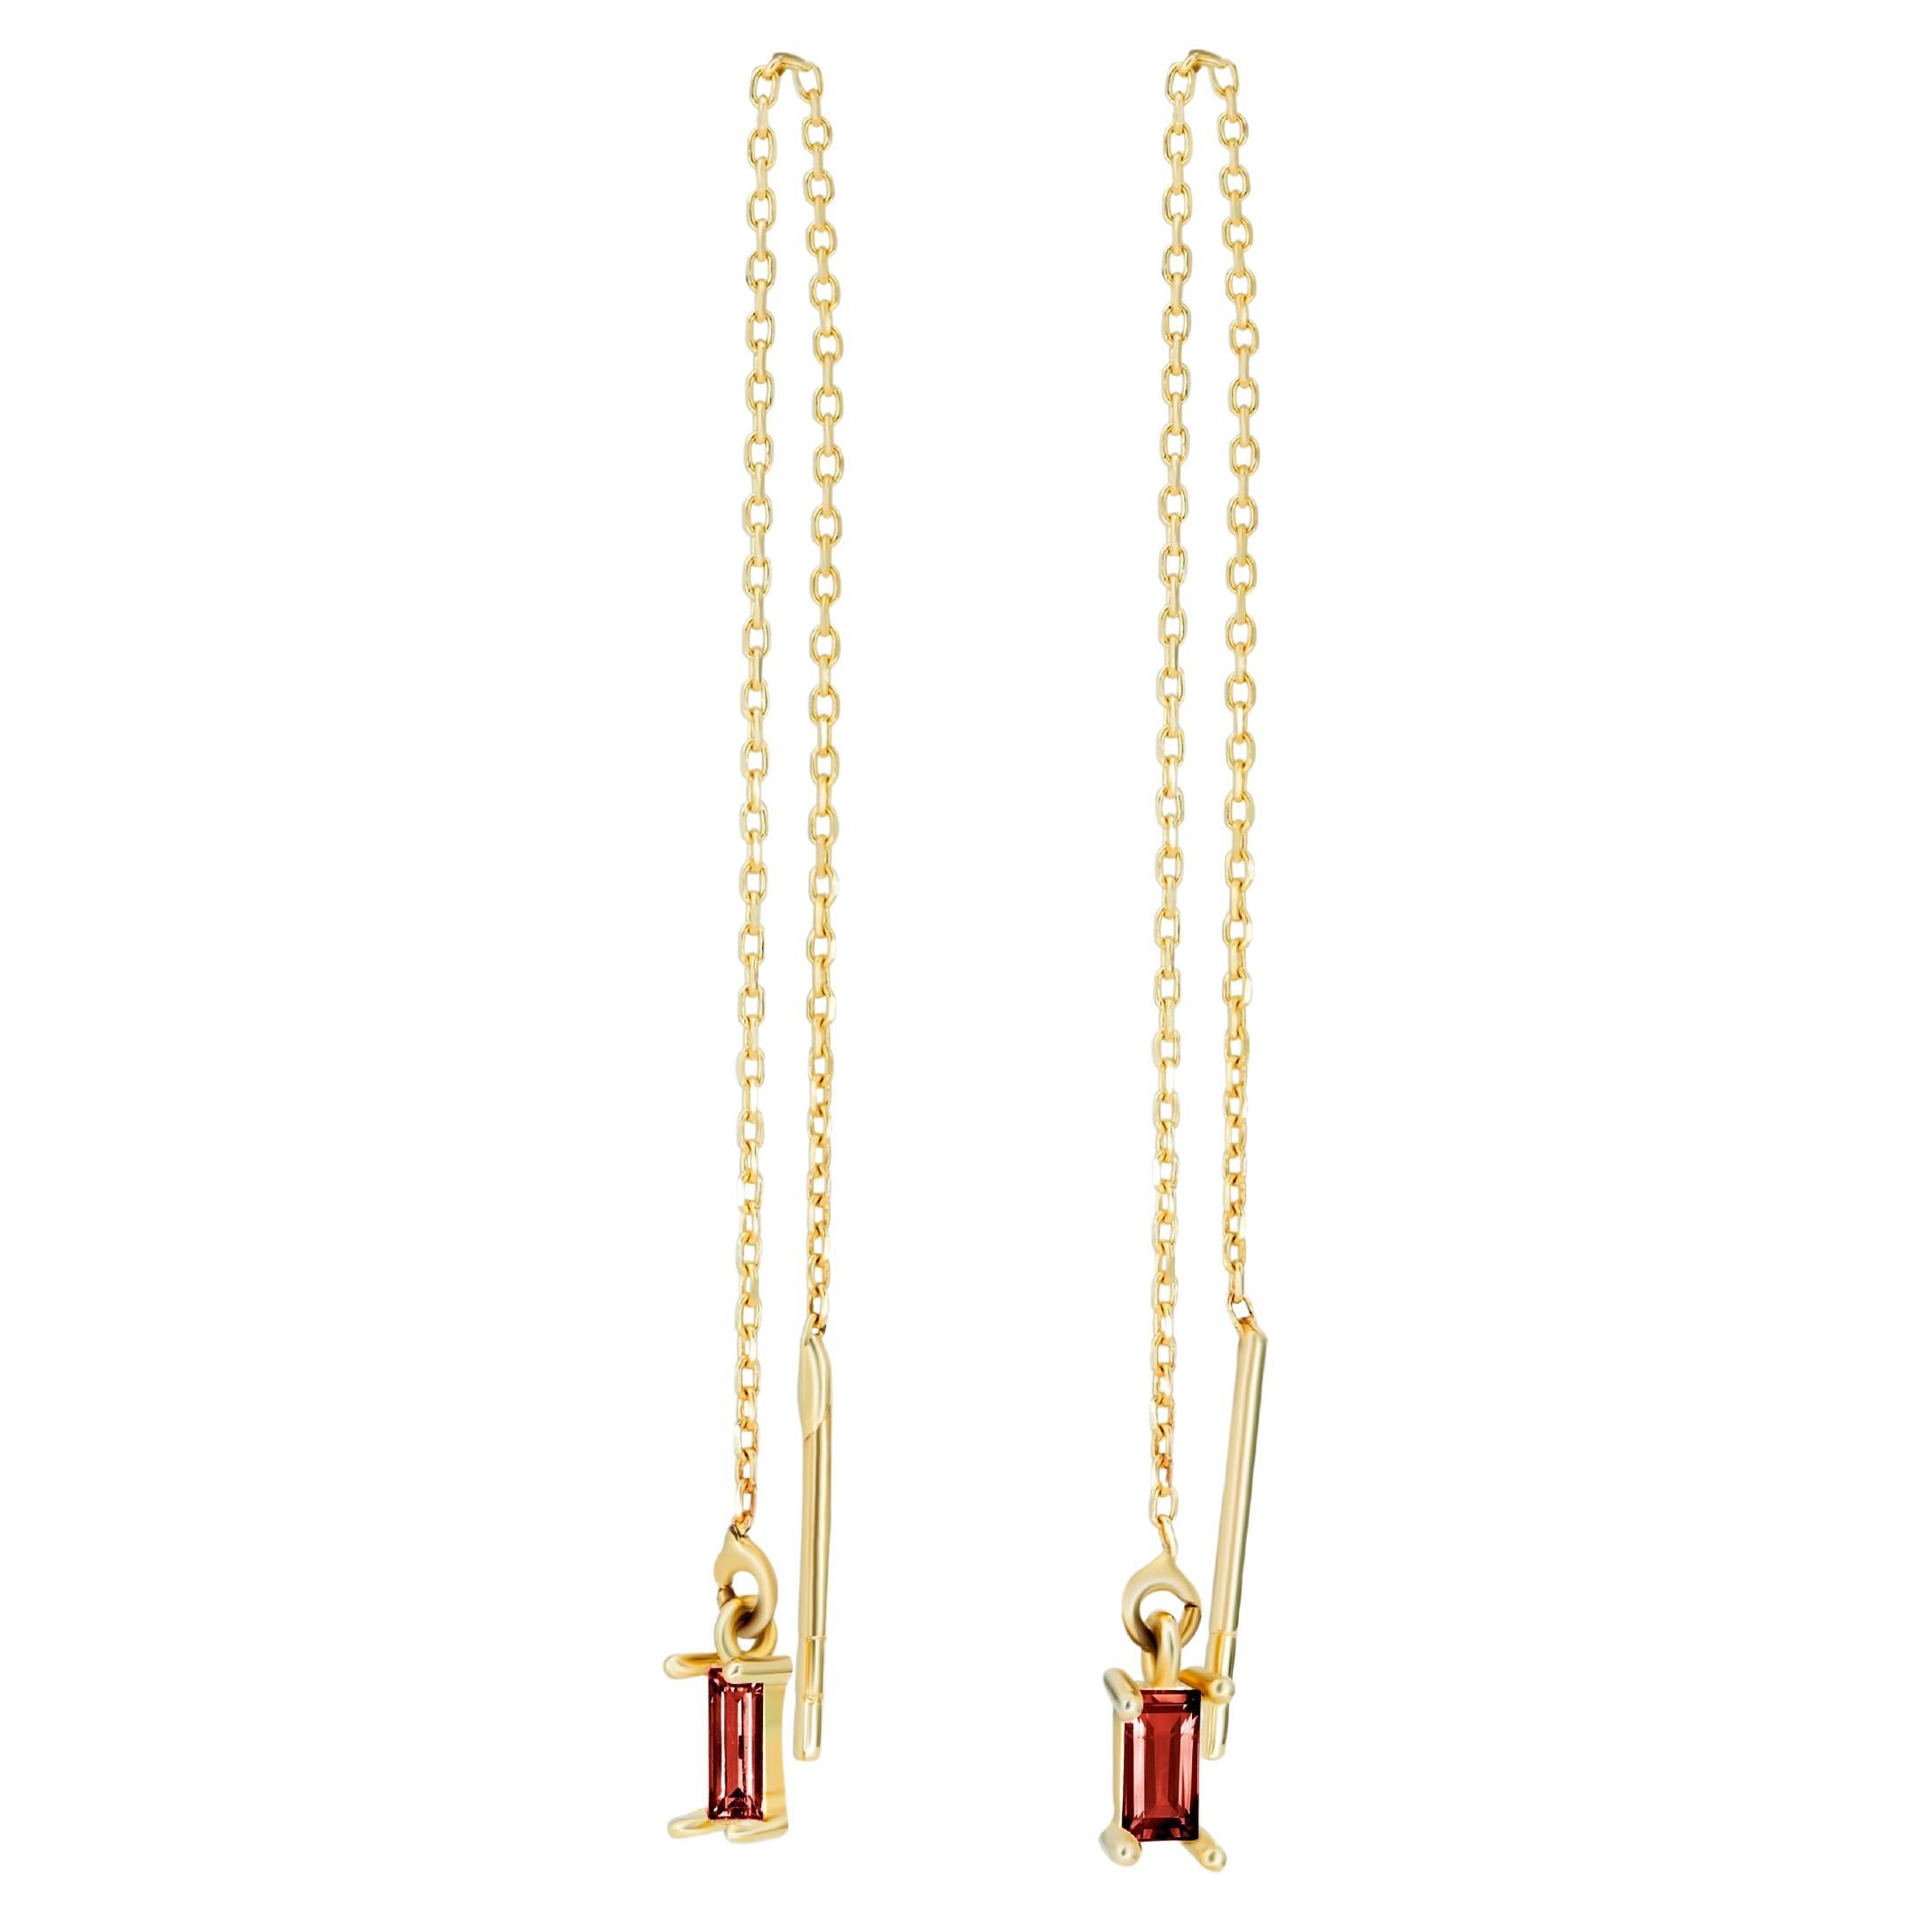 14k solid gold drop earrings with garnets.  For Sale